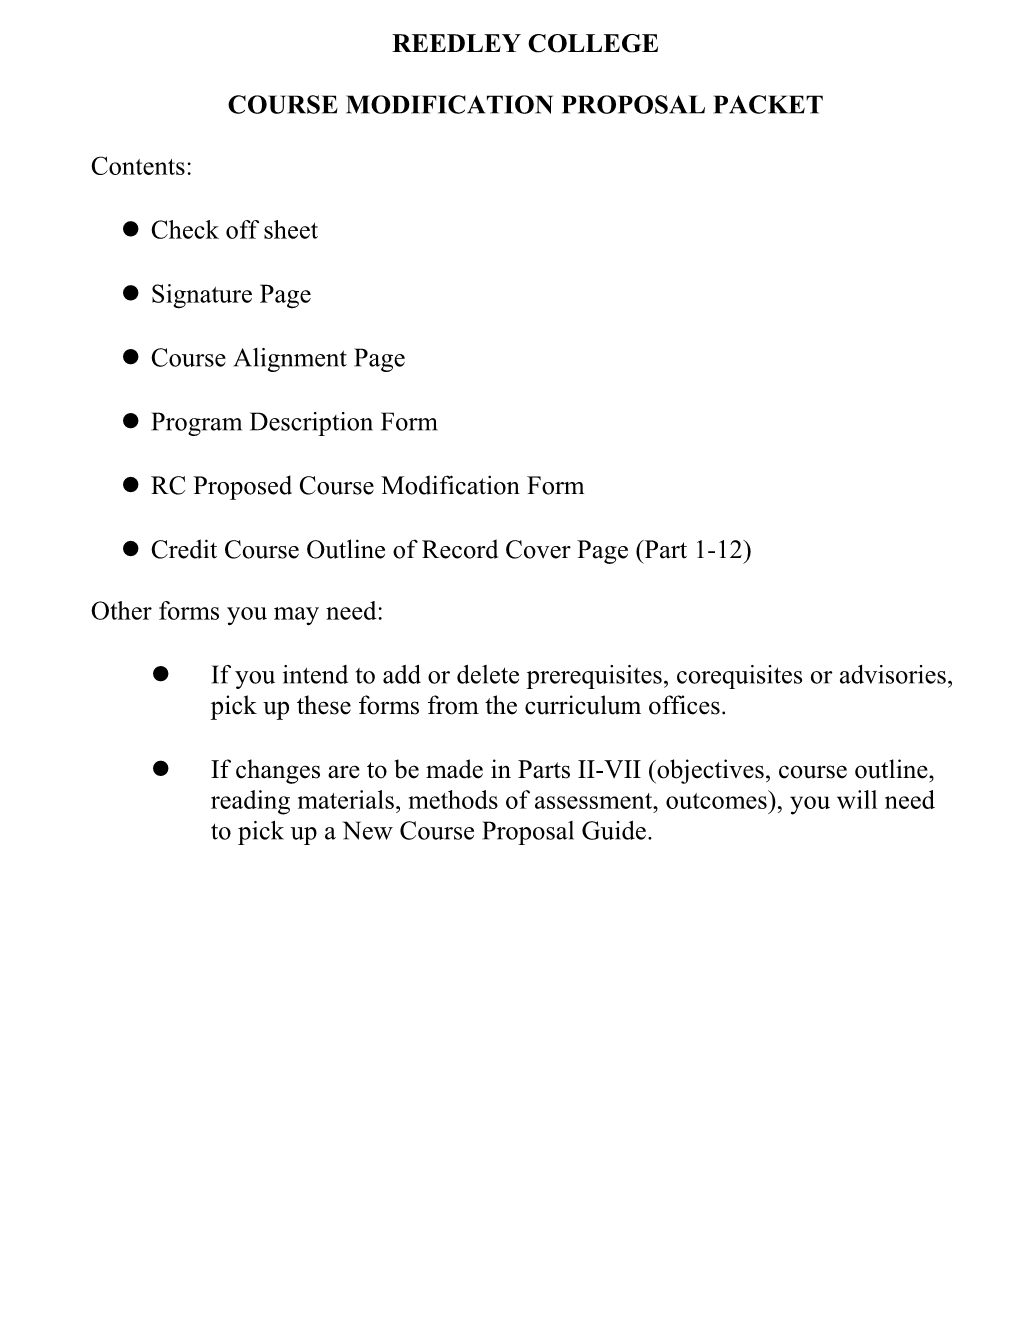 Course Modification Proposal Packet